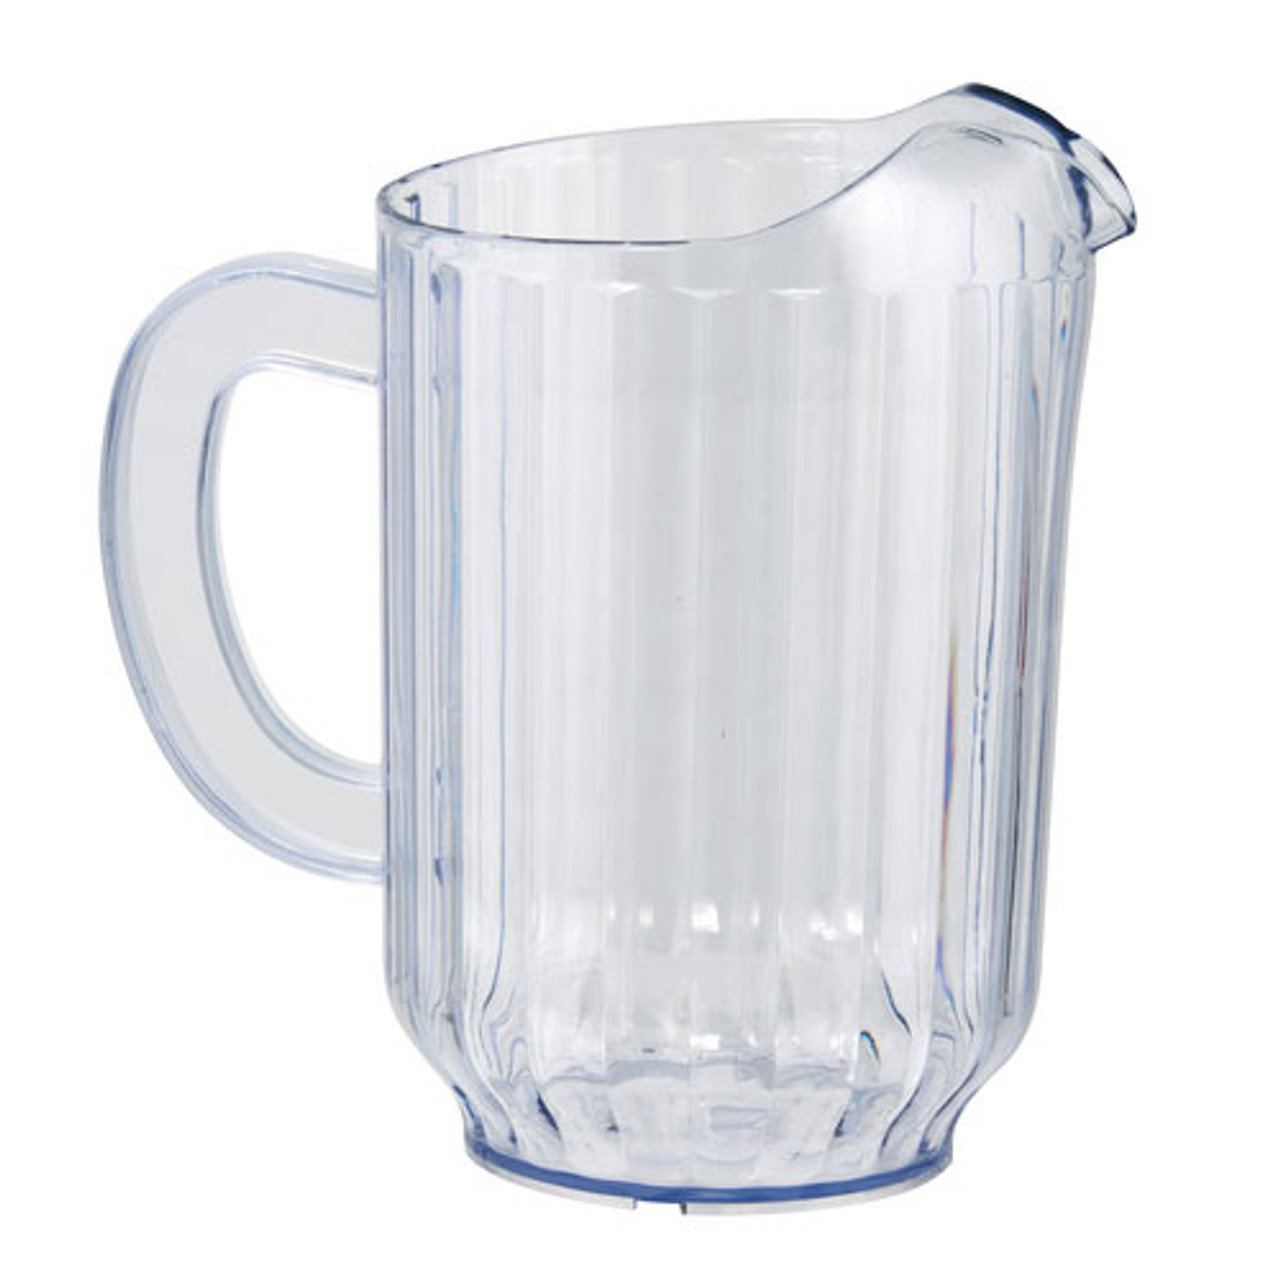 https://cdn11.bigcommerce.com/s-g3i86bef61/images/stencil/1280x1280/products/3120/1091/Winco-WPS-60-Water-Pitcher-Plastic__00848.1662047215.jpg?c=1